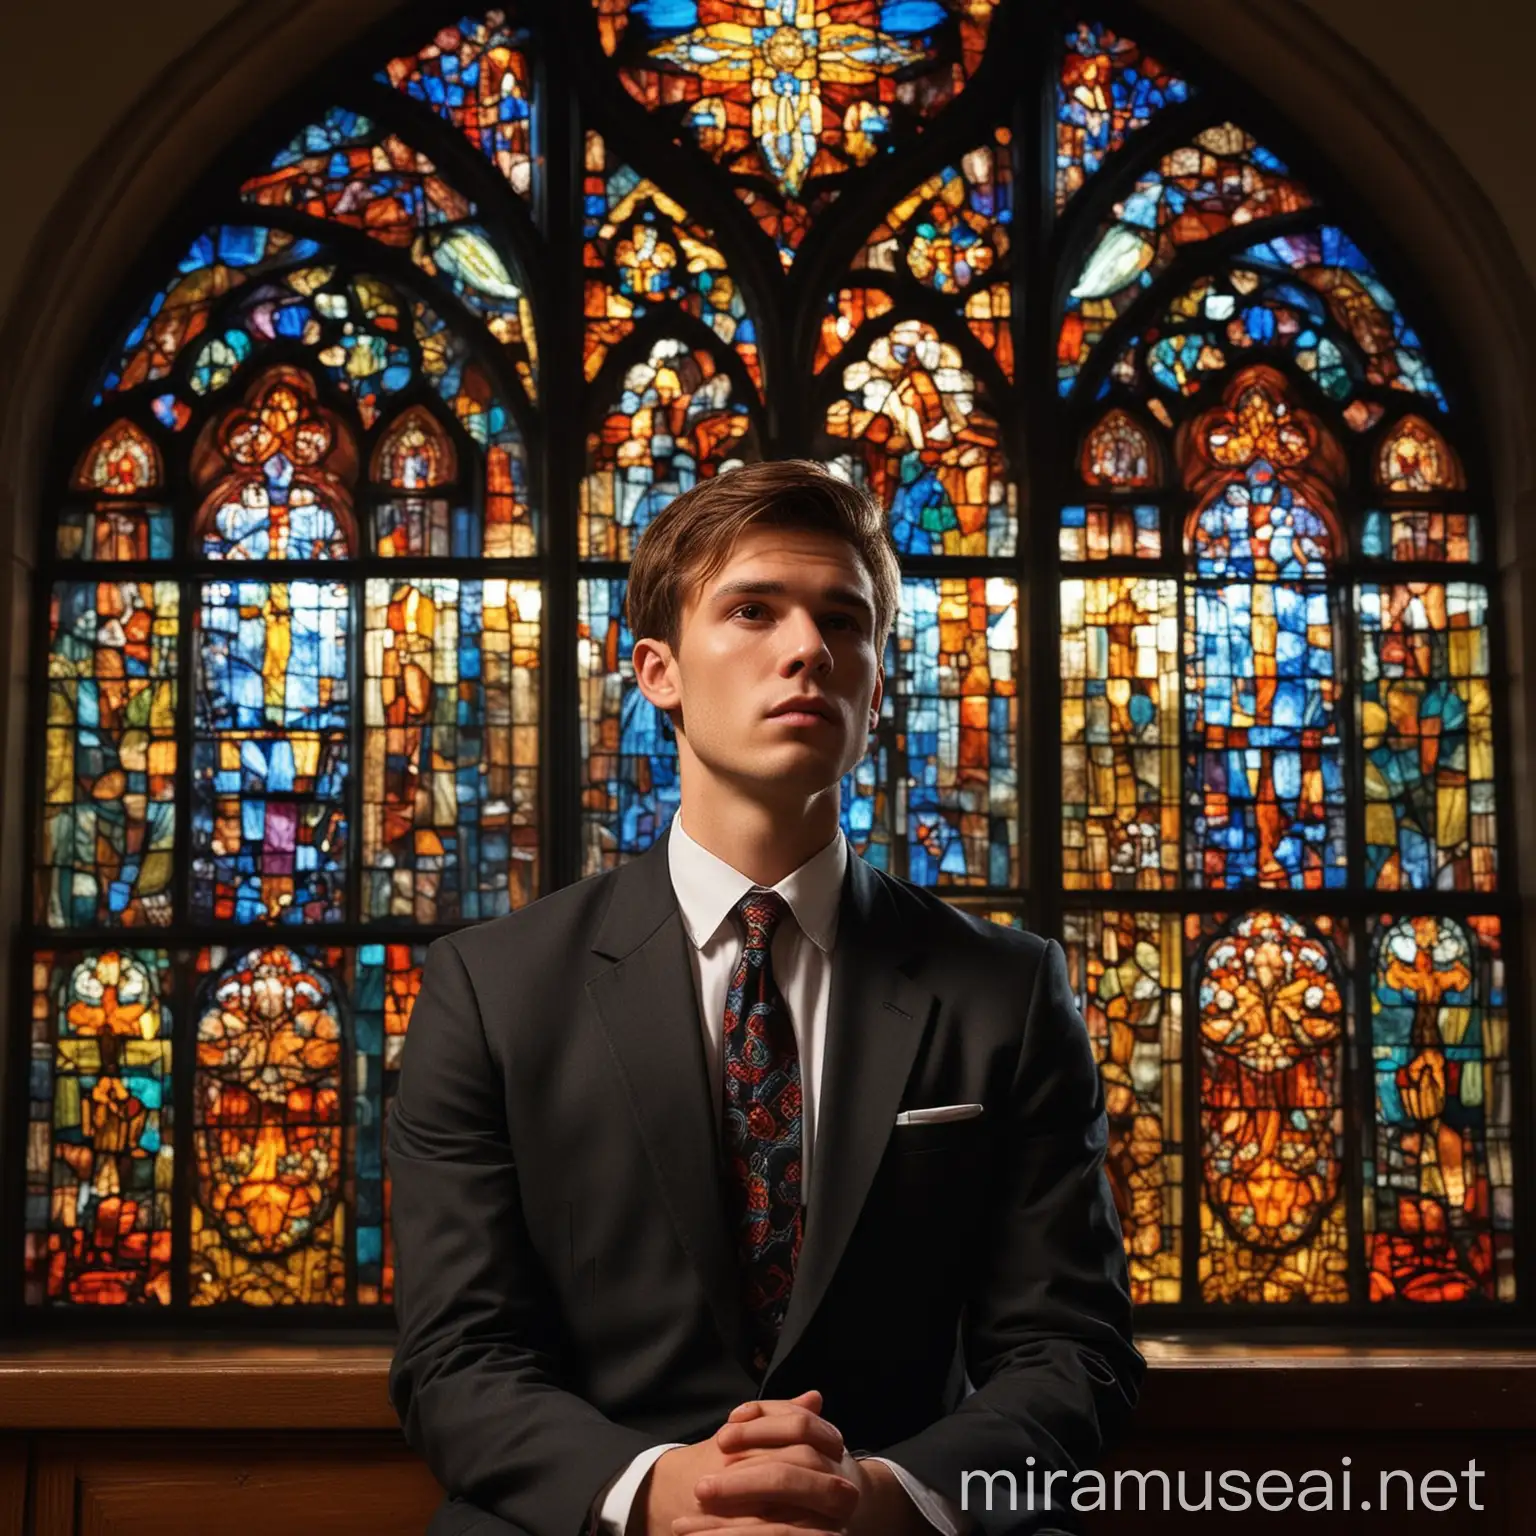 Contemplative Man in Formal Suit Enthralled by Stained Glass Splendor